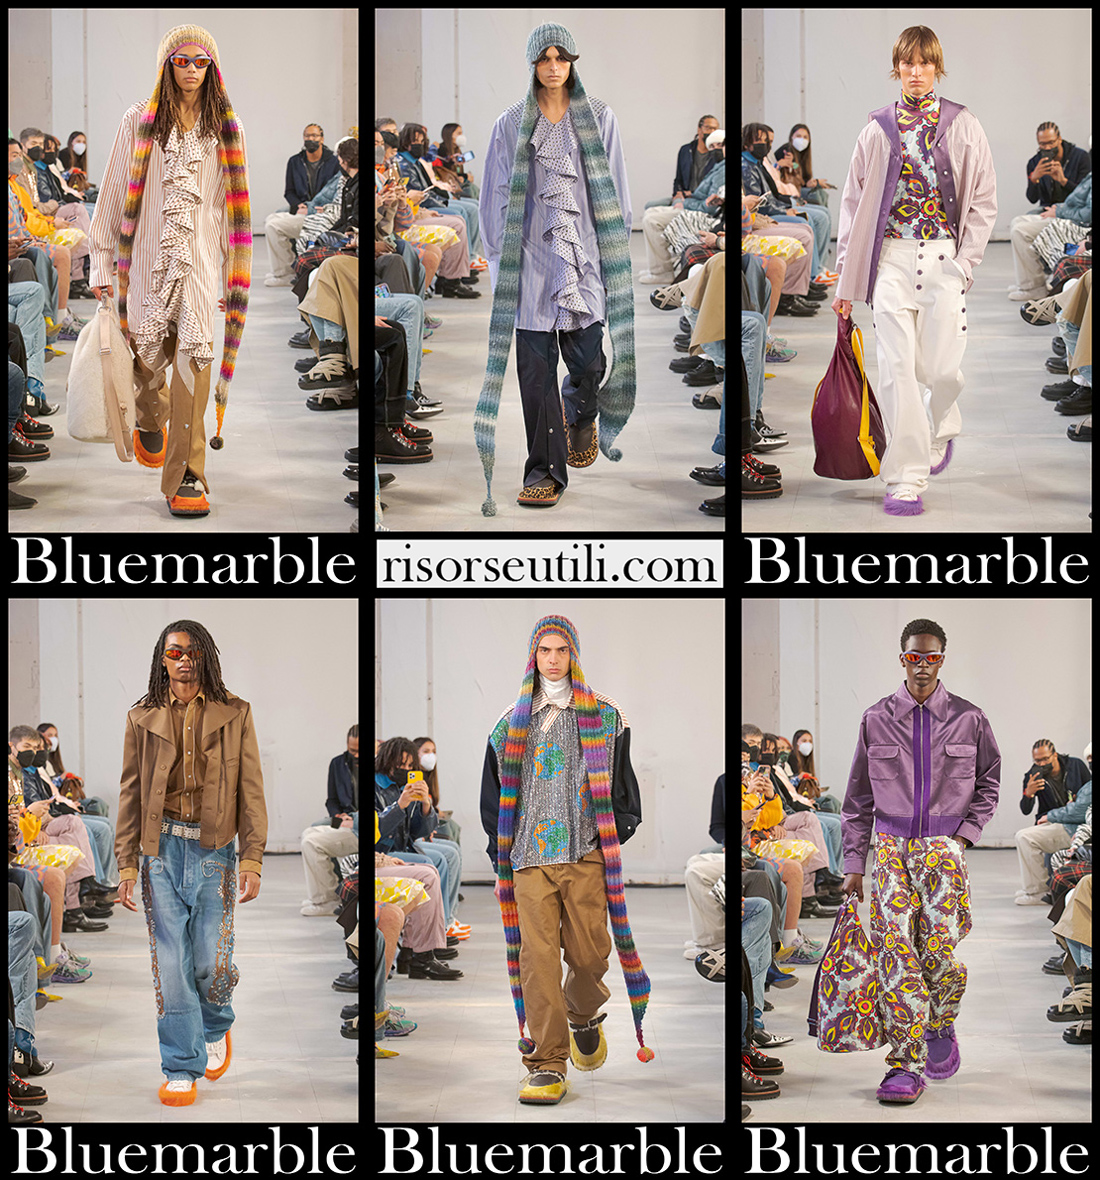 Bluemarble fall winter 2022-2023 men's fashion collection